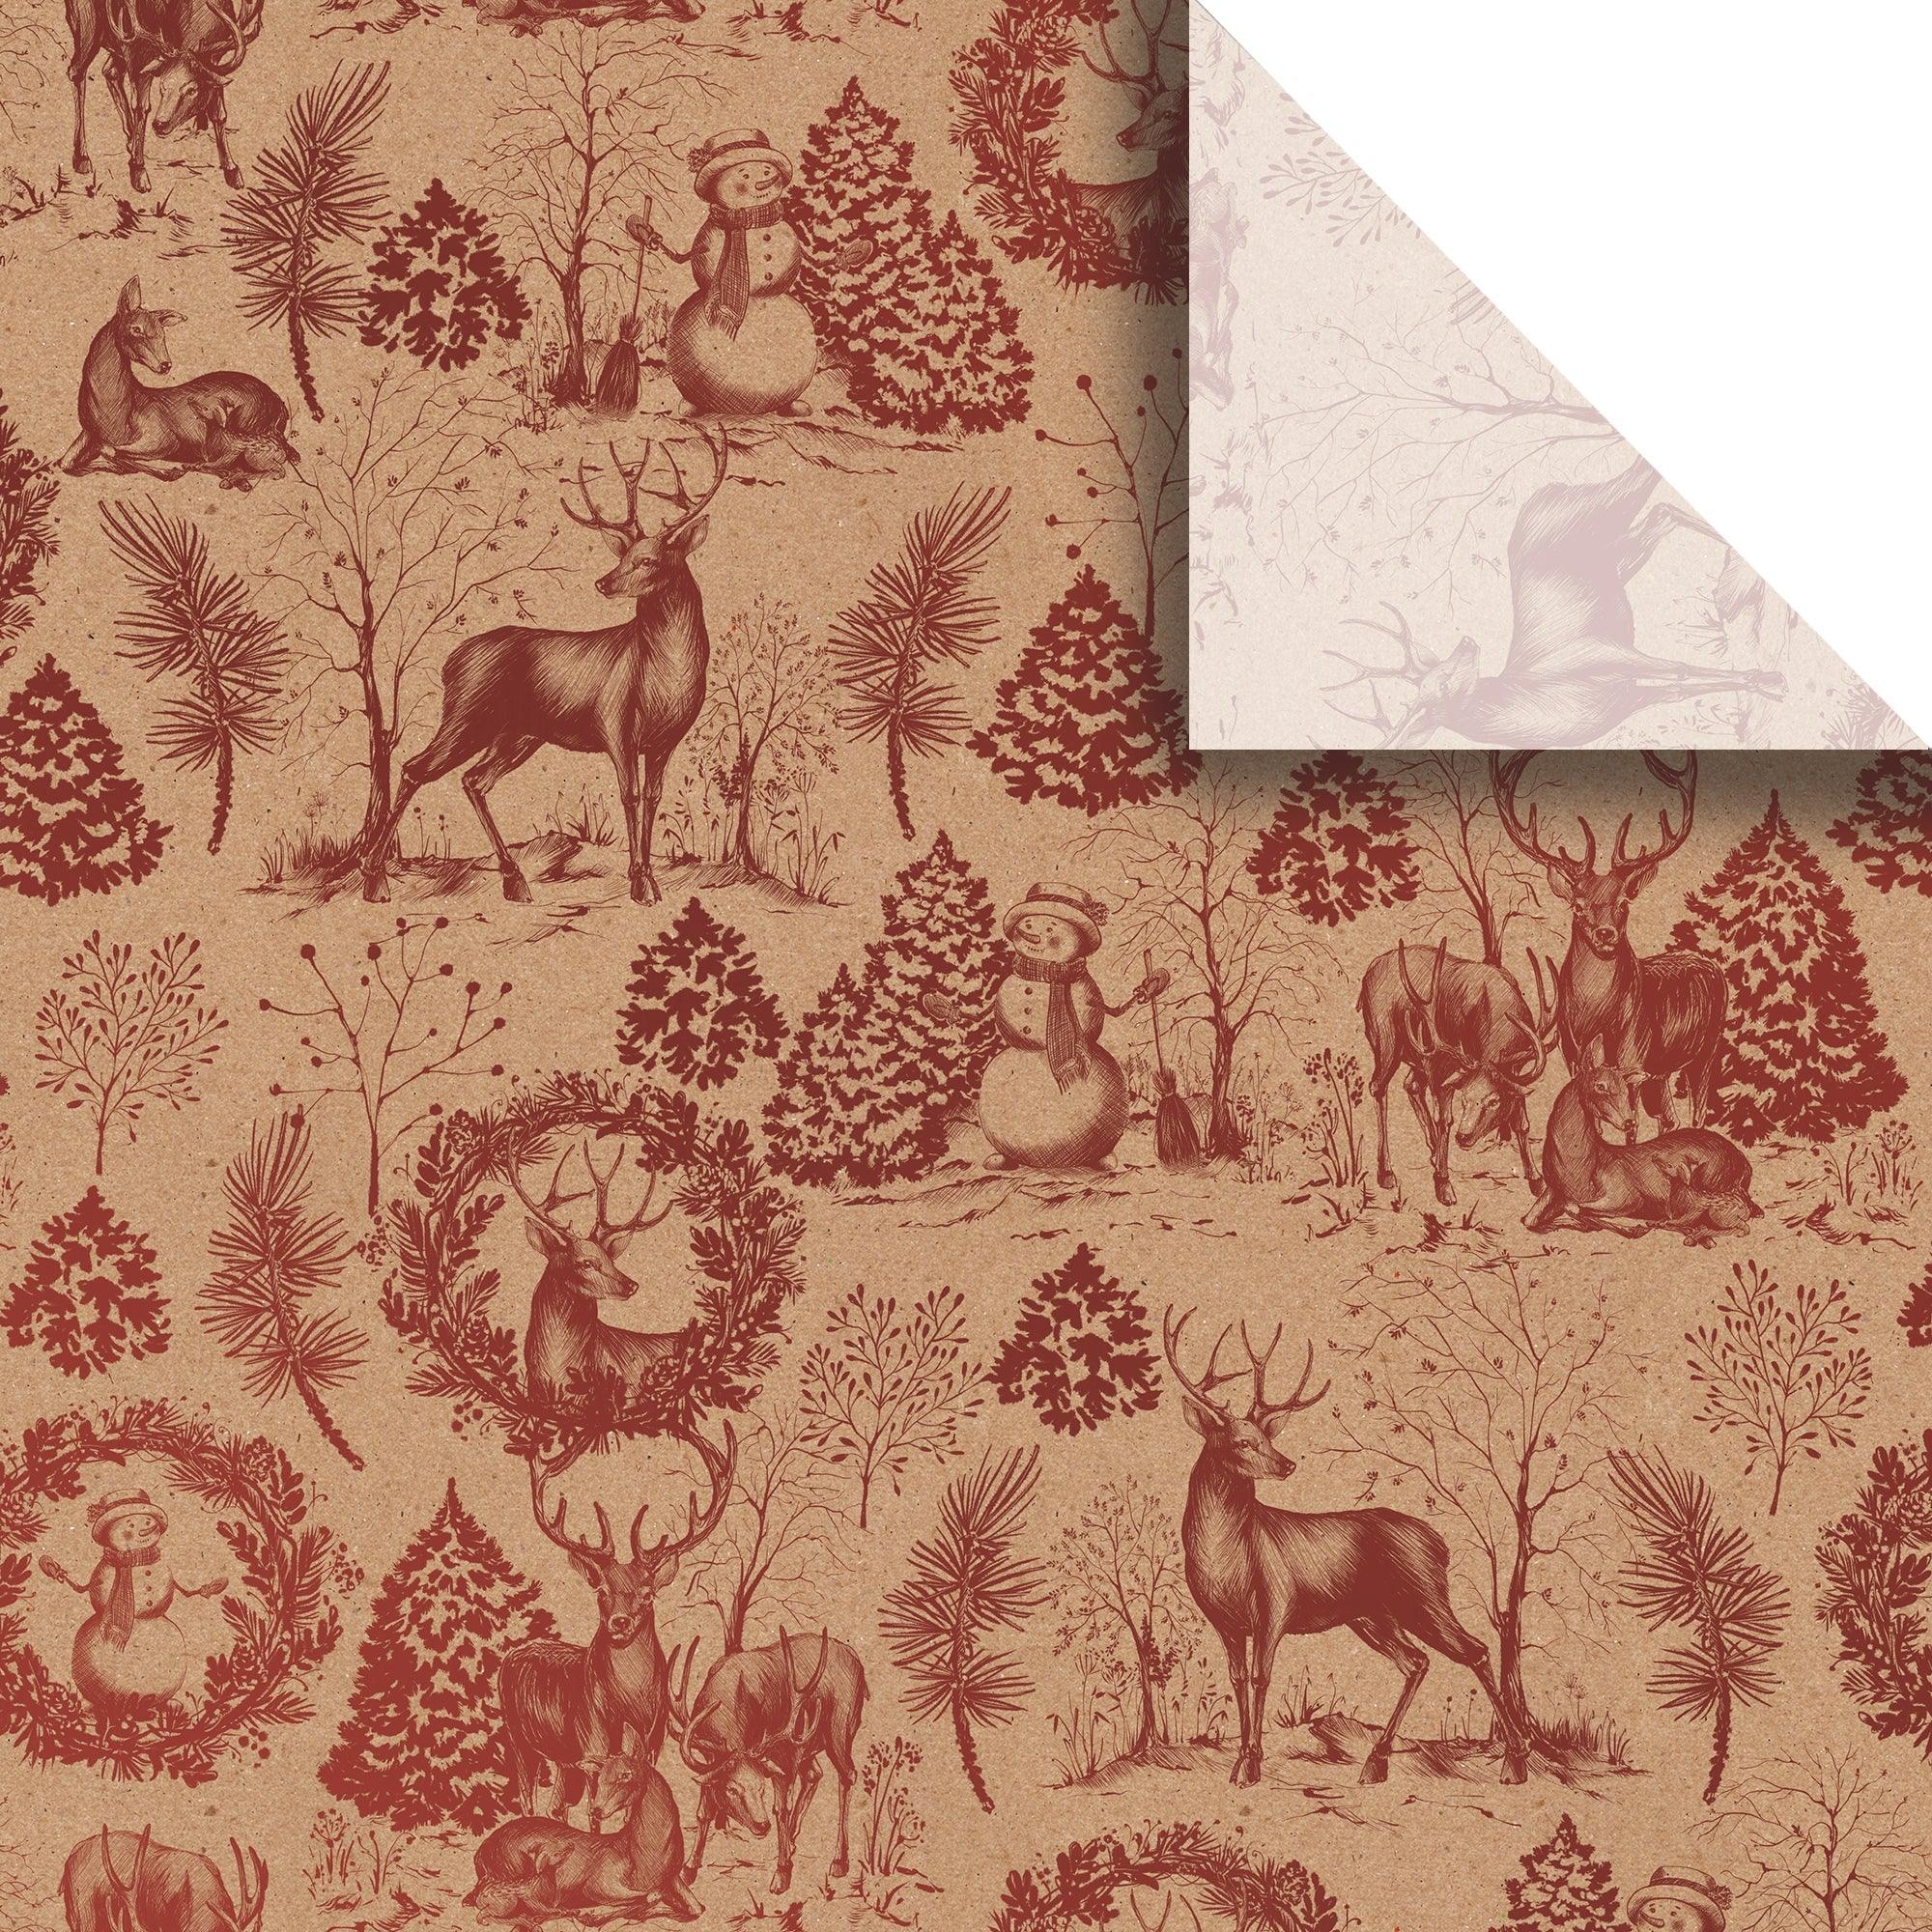 Winter Woods 20" x 30" Christmas Gift Tissue Paper by Present Paper - Vysn